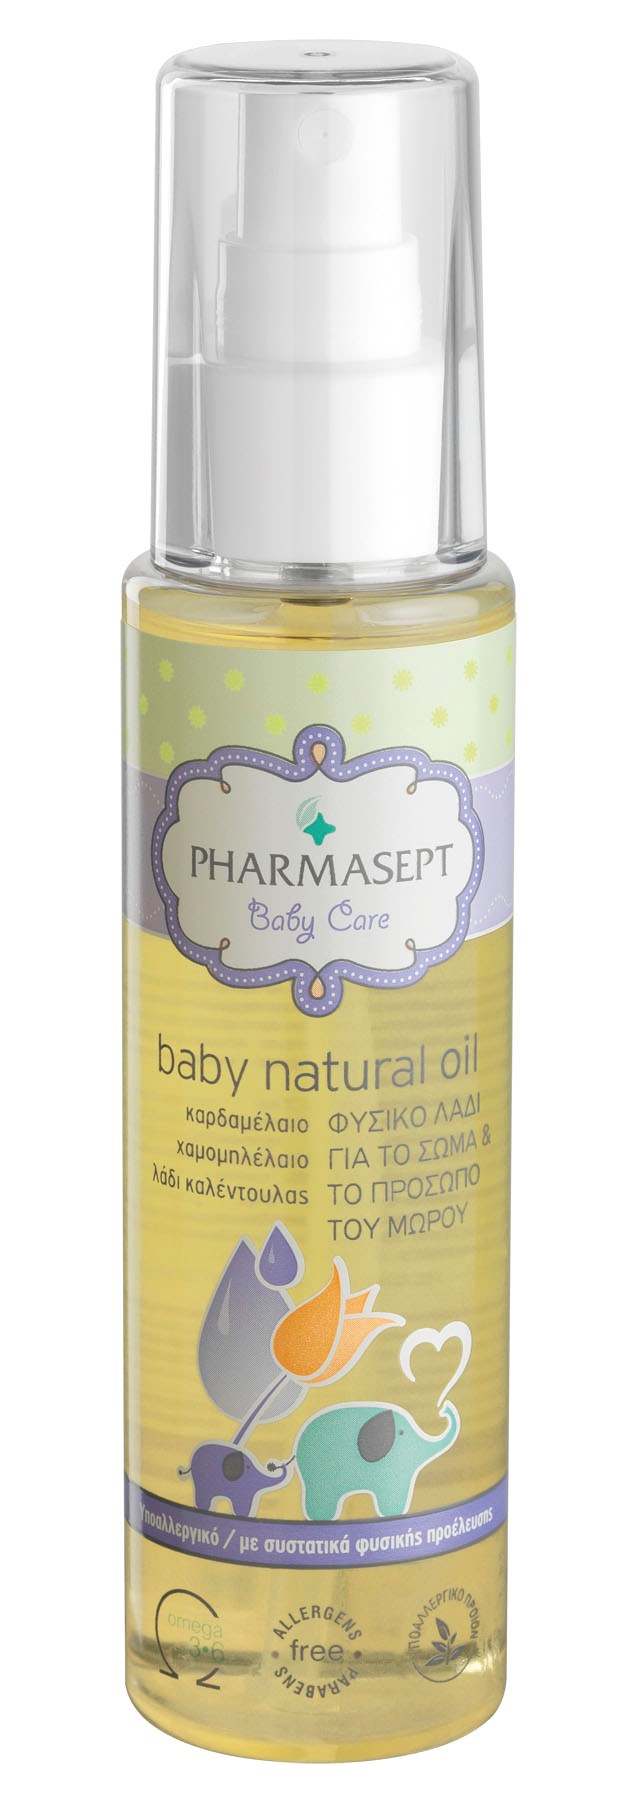 Baby Natural Oil